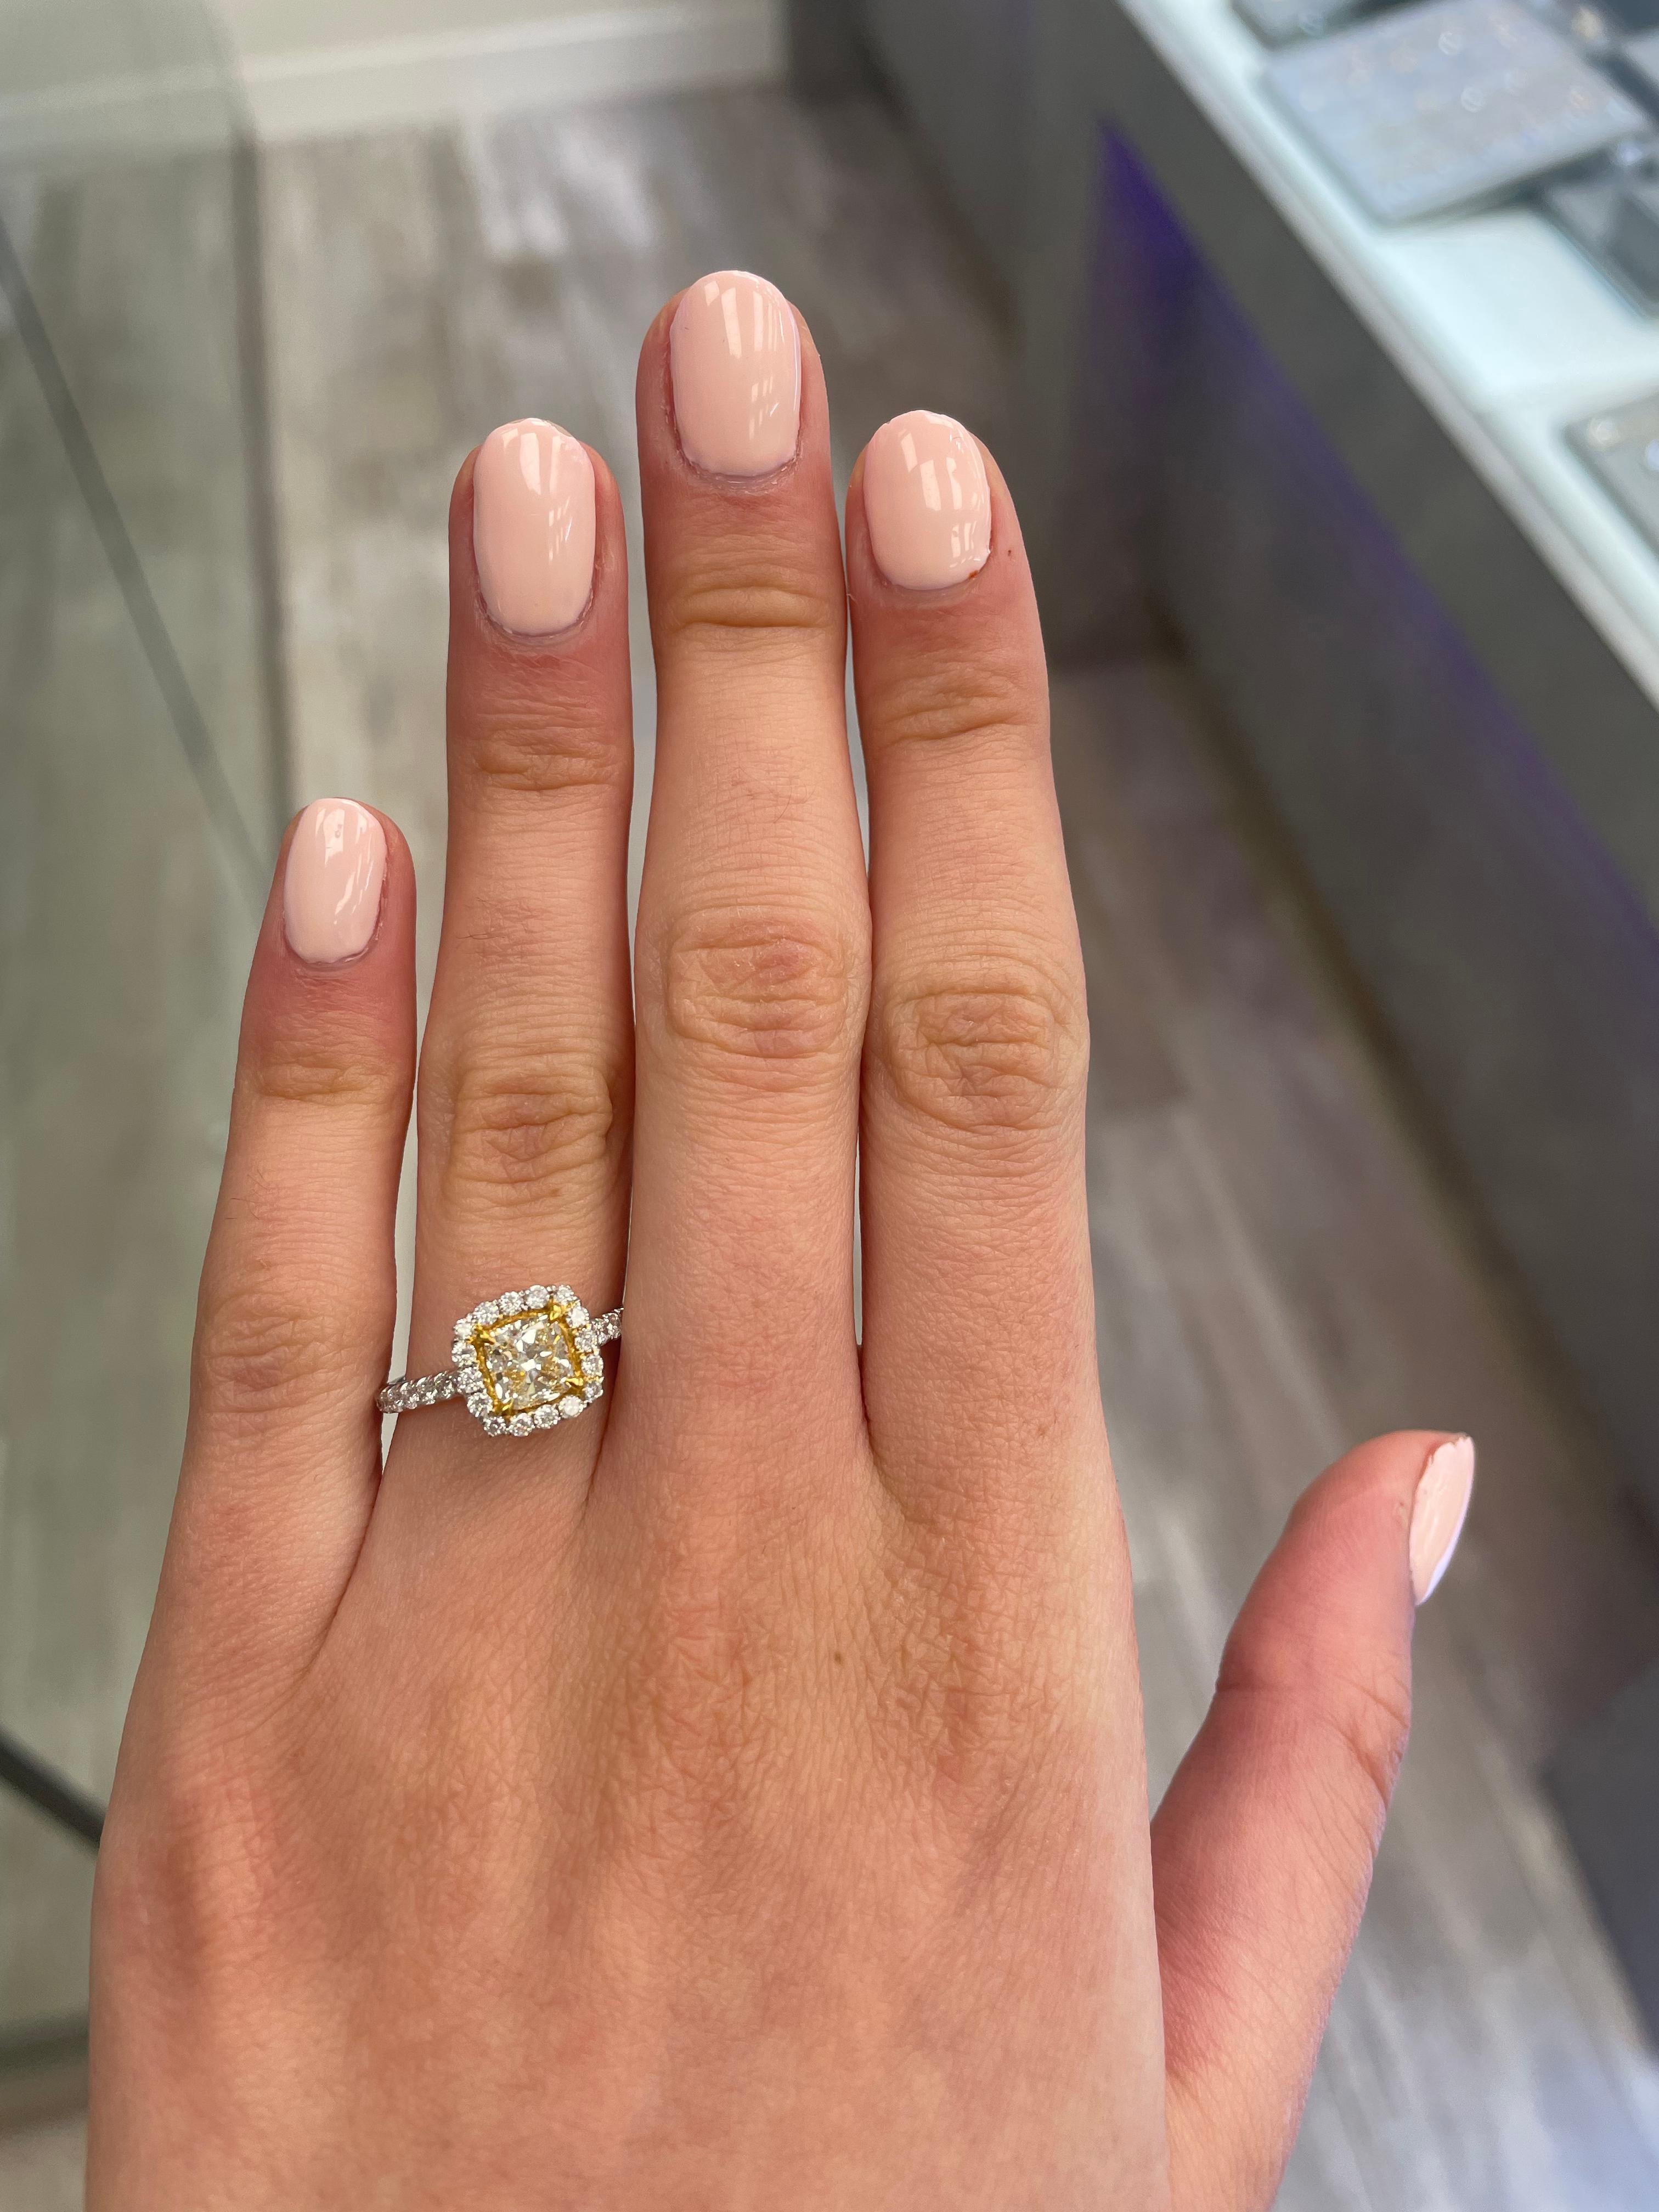 Stunning modern EGL certified yellow diamond with halo ring, two-tone 18k yellow and white gold. By Alexander Beverly Hills
1.51 carats total diamond weight.
1.02 carat cushion cut Fancy Yellow color and VS1 clarity diamond, EGL graded. Complimented